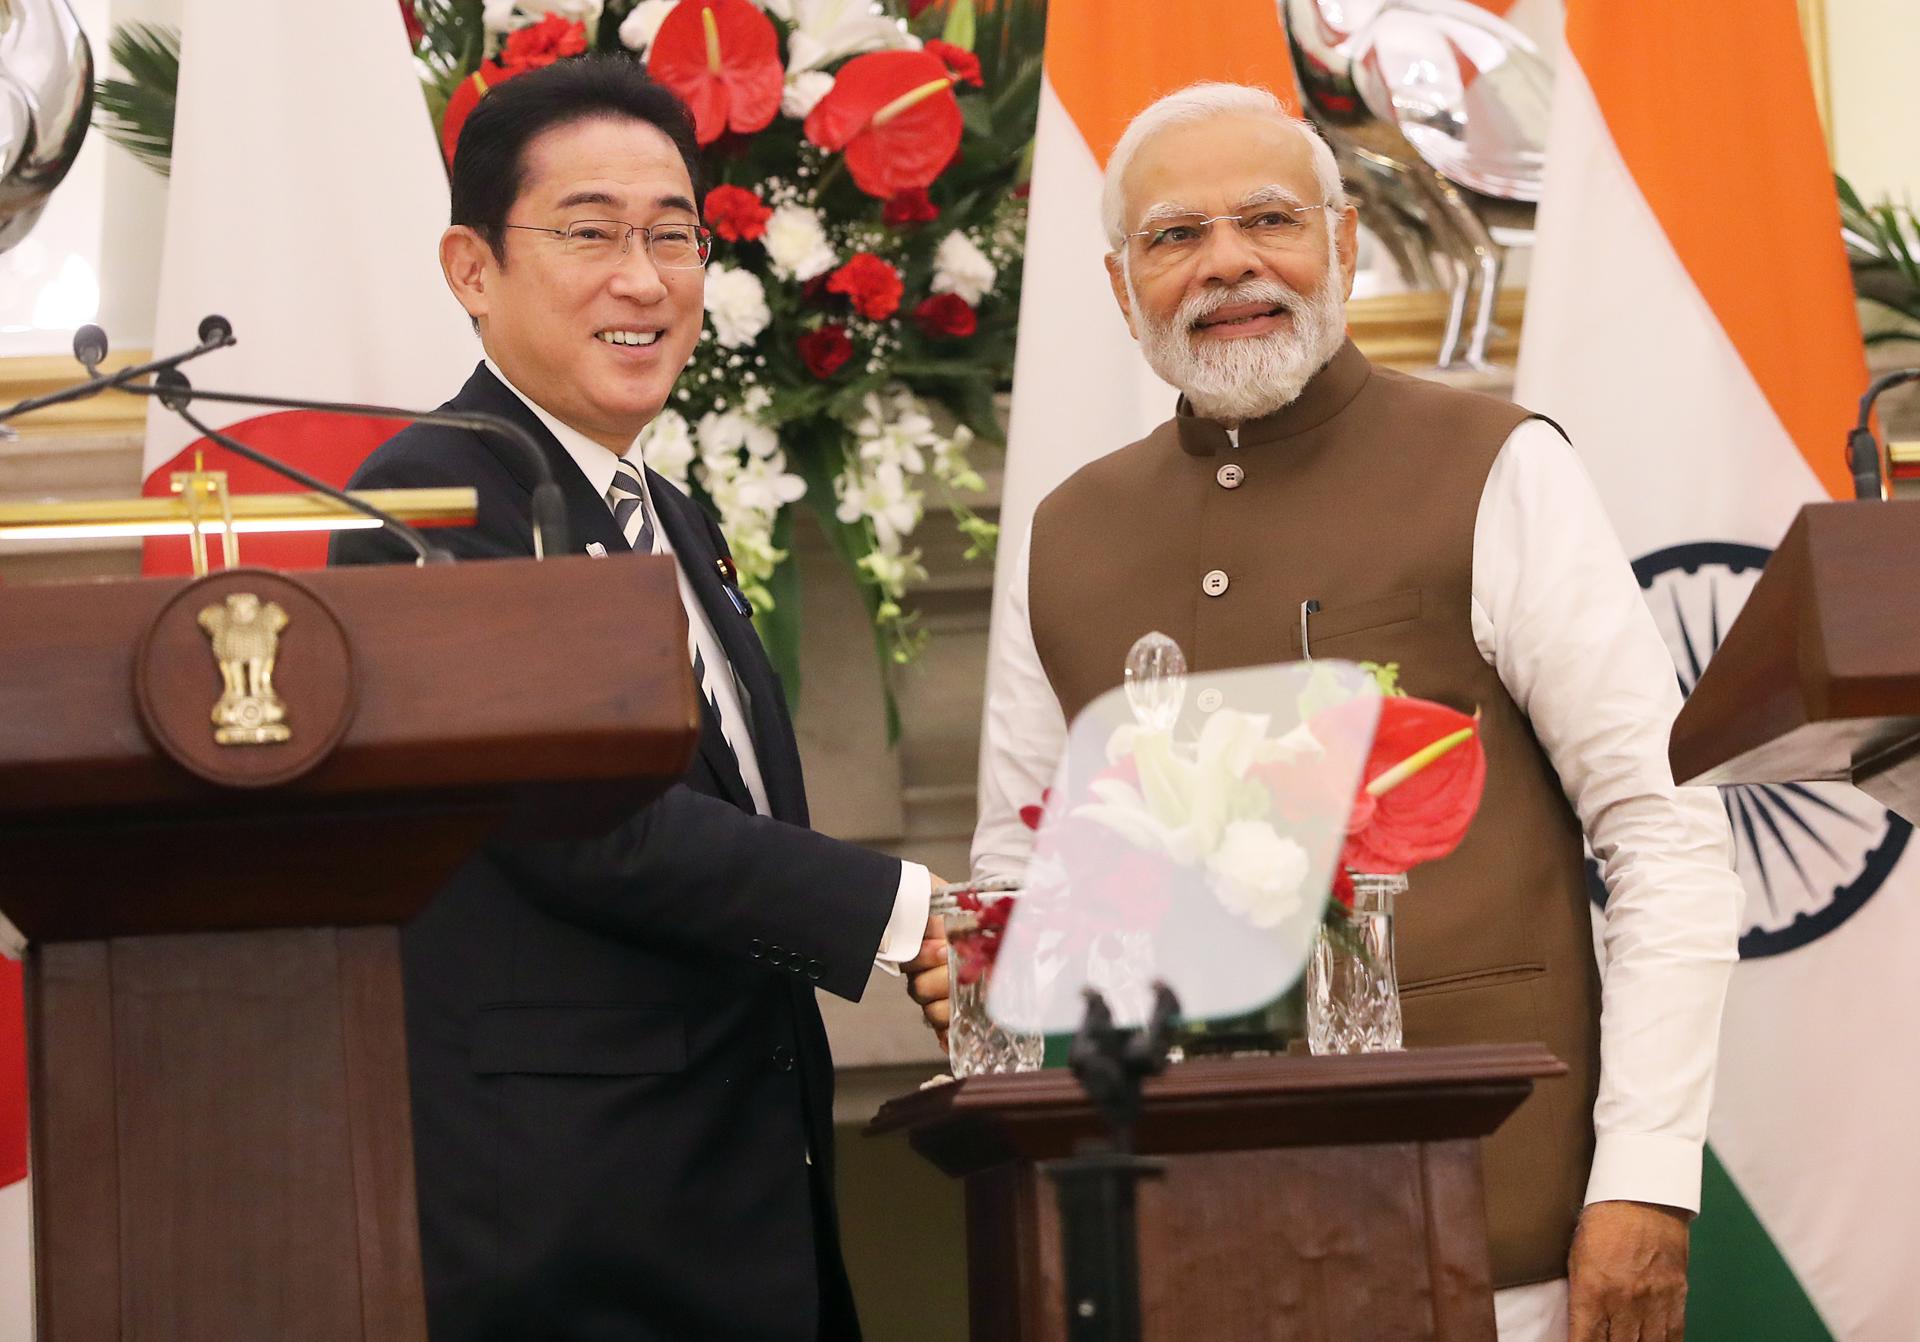 Japanese Prime Minister Kishida Fumio (L) and Indian Prime Minister Narendra Modi shake hands during a joint statement following their meeting at Hyderabad House in New Delhi, India 20 March 2023. EFE-EPA FILE/HARISH TYAGI